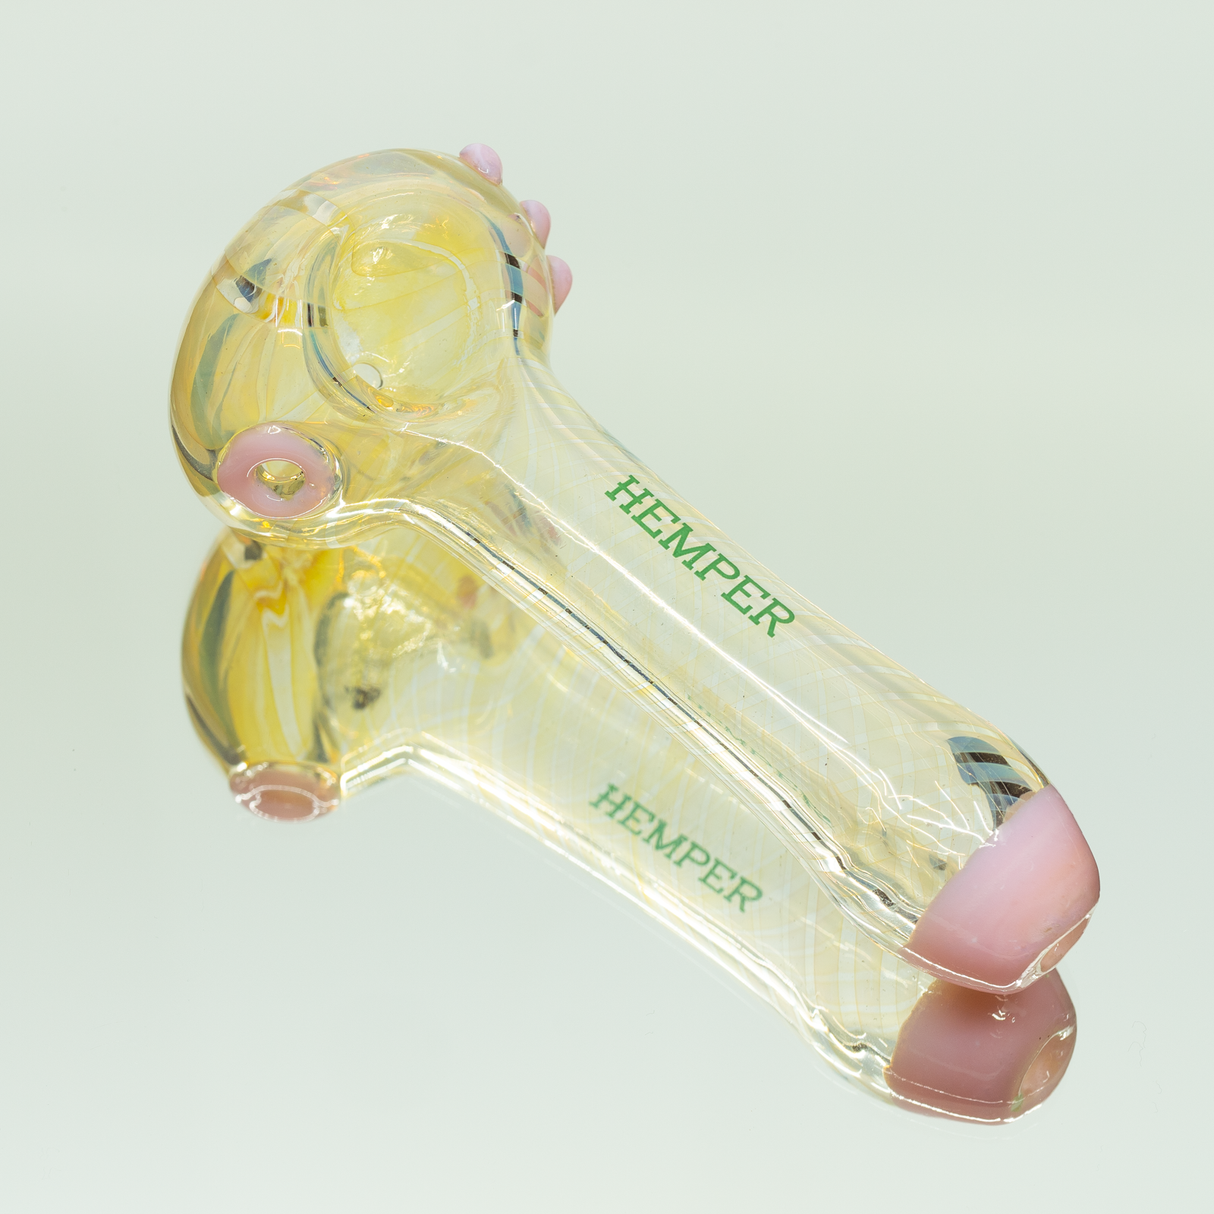 Hemper Color Changing Pipe, 6" Hand Pipe with Green and Purple Hues, Top View